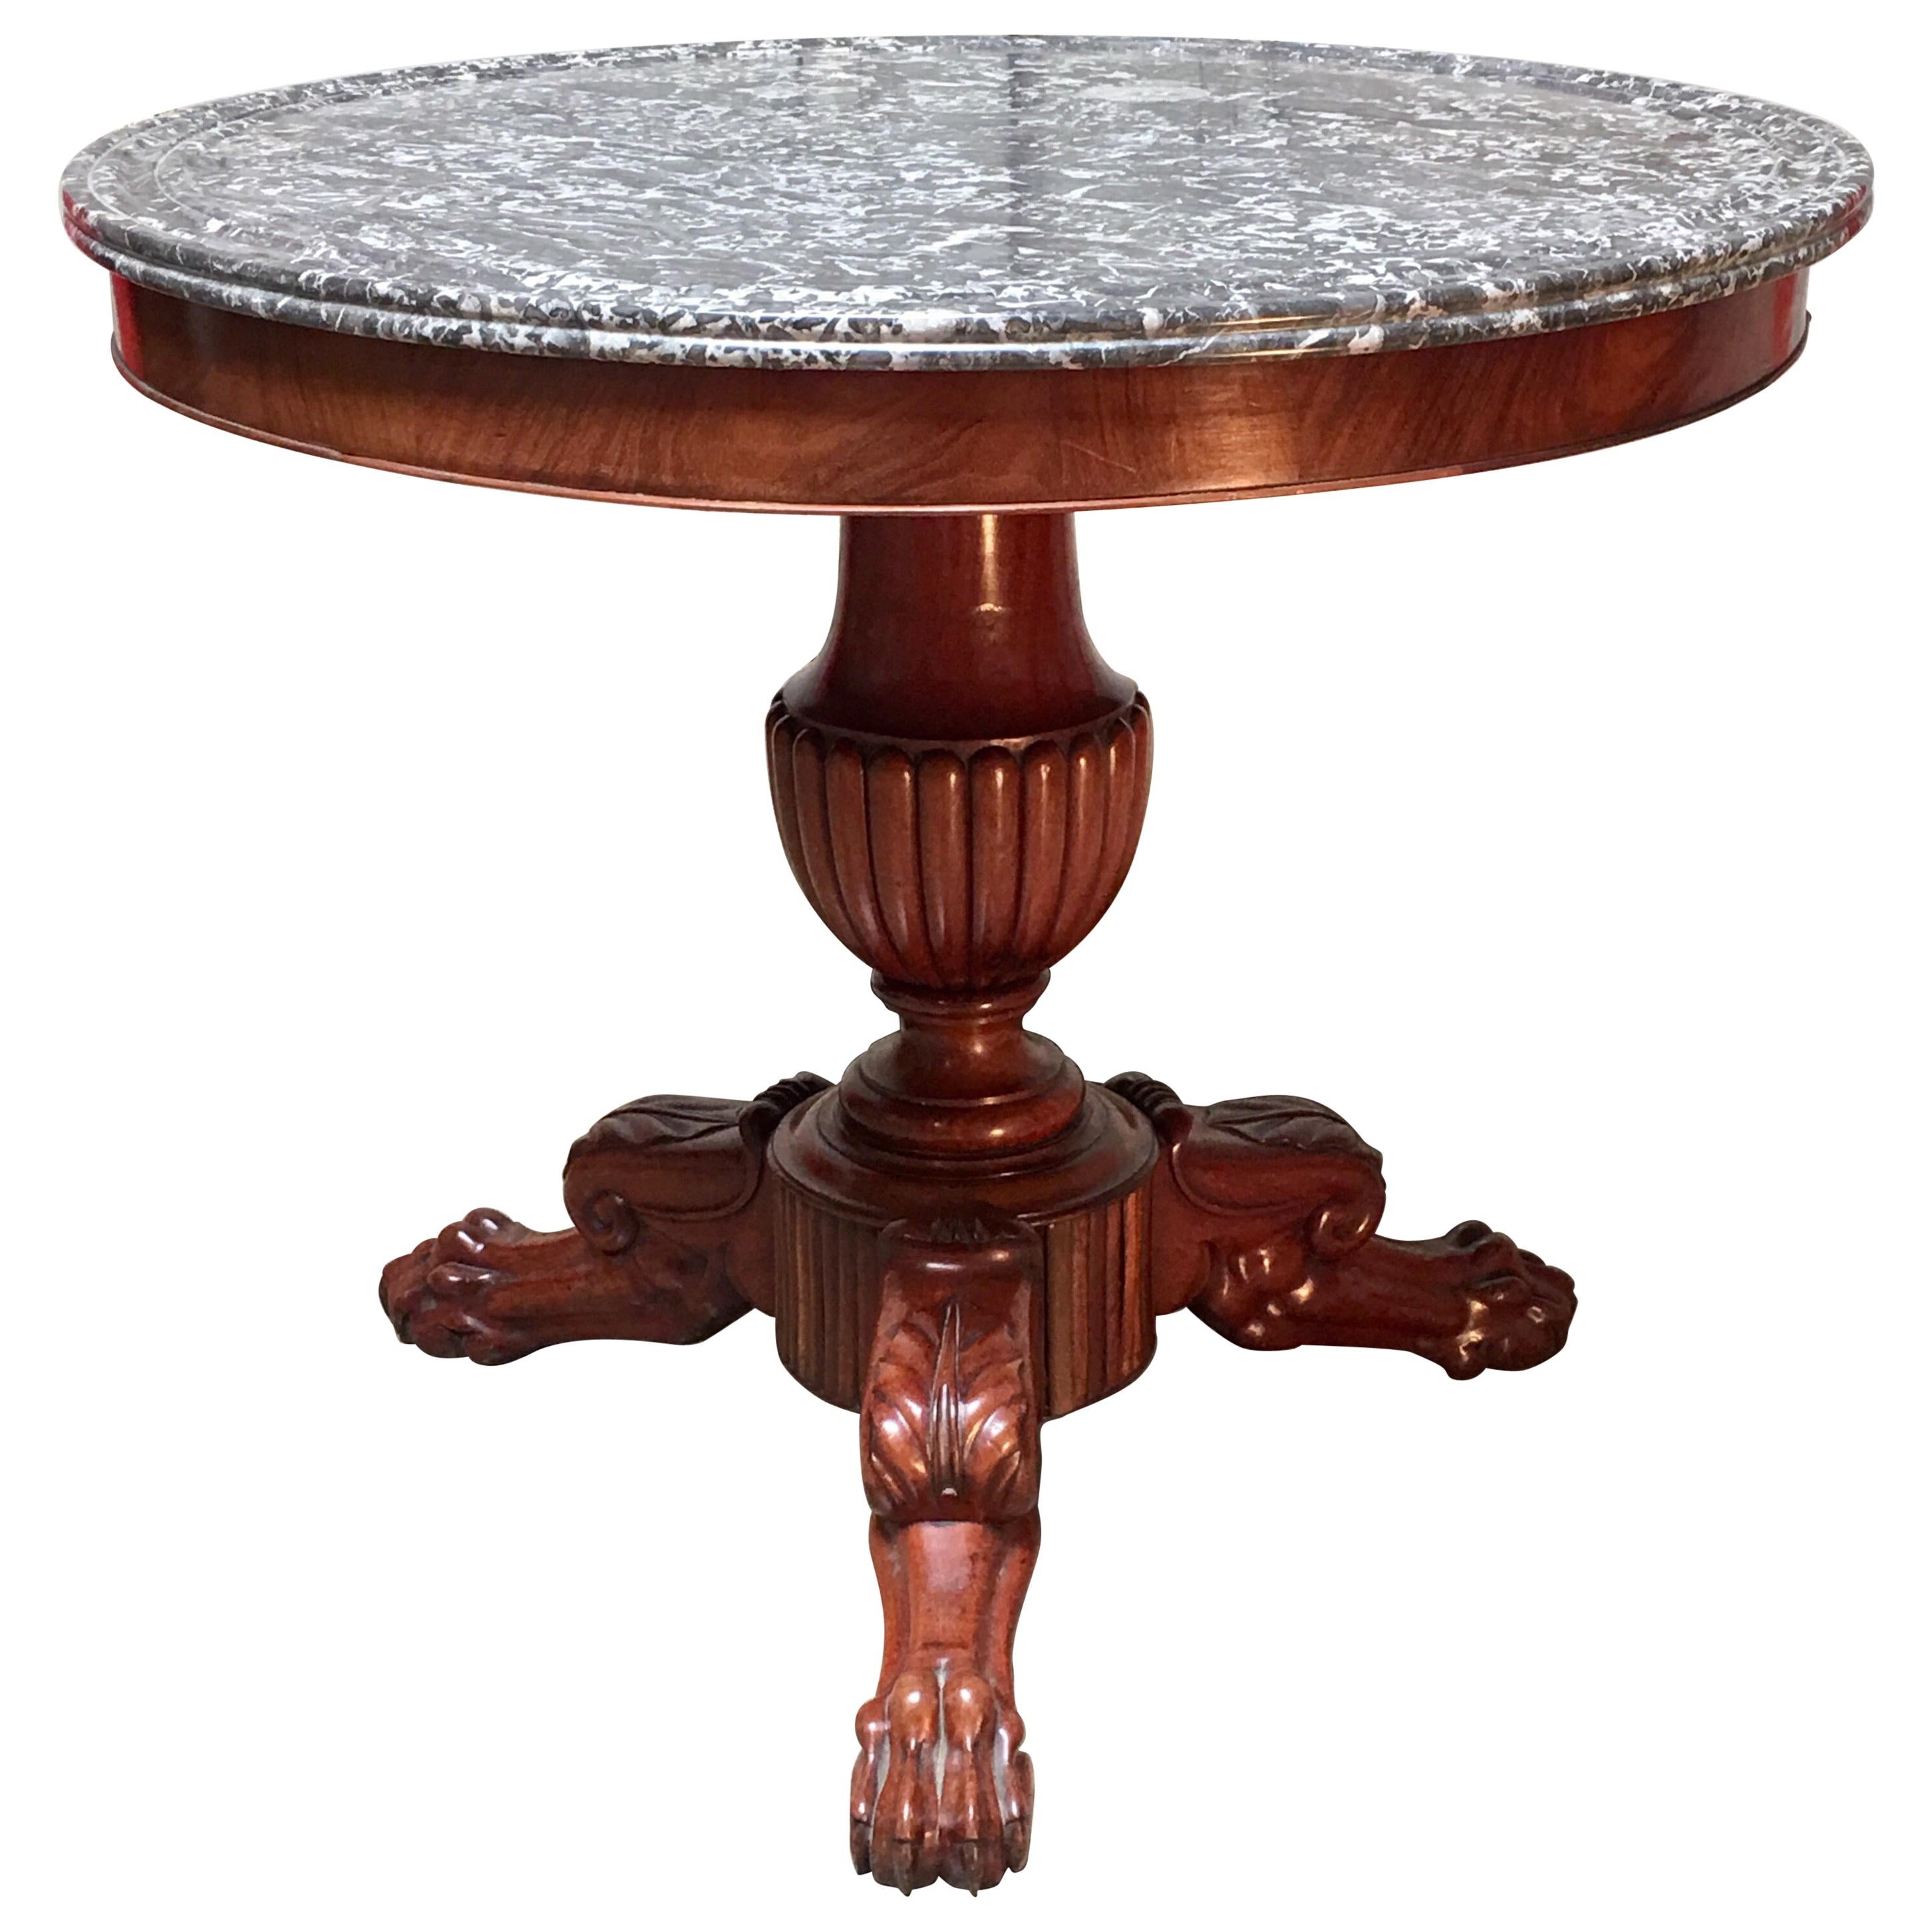 Early 19th Century French Charles X Mahogany Pedestal Table with a Marble Top